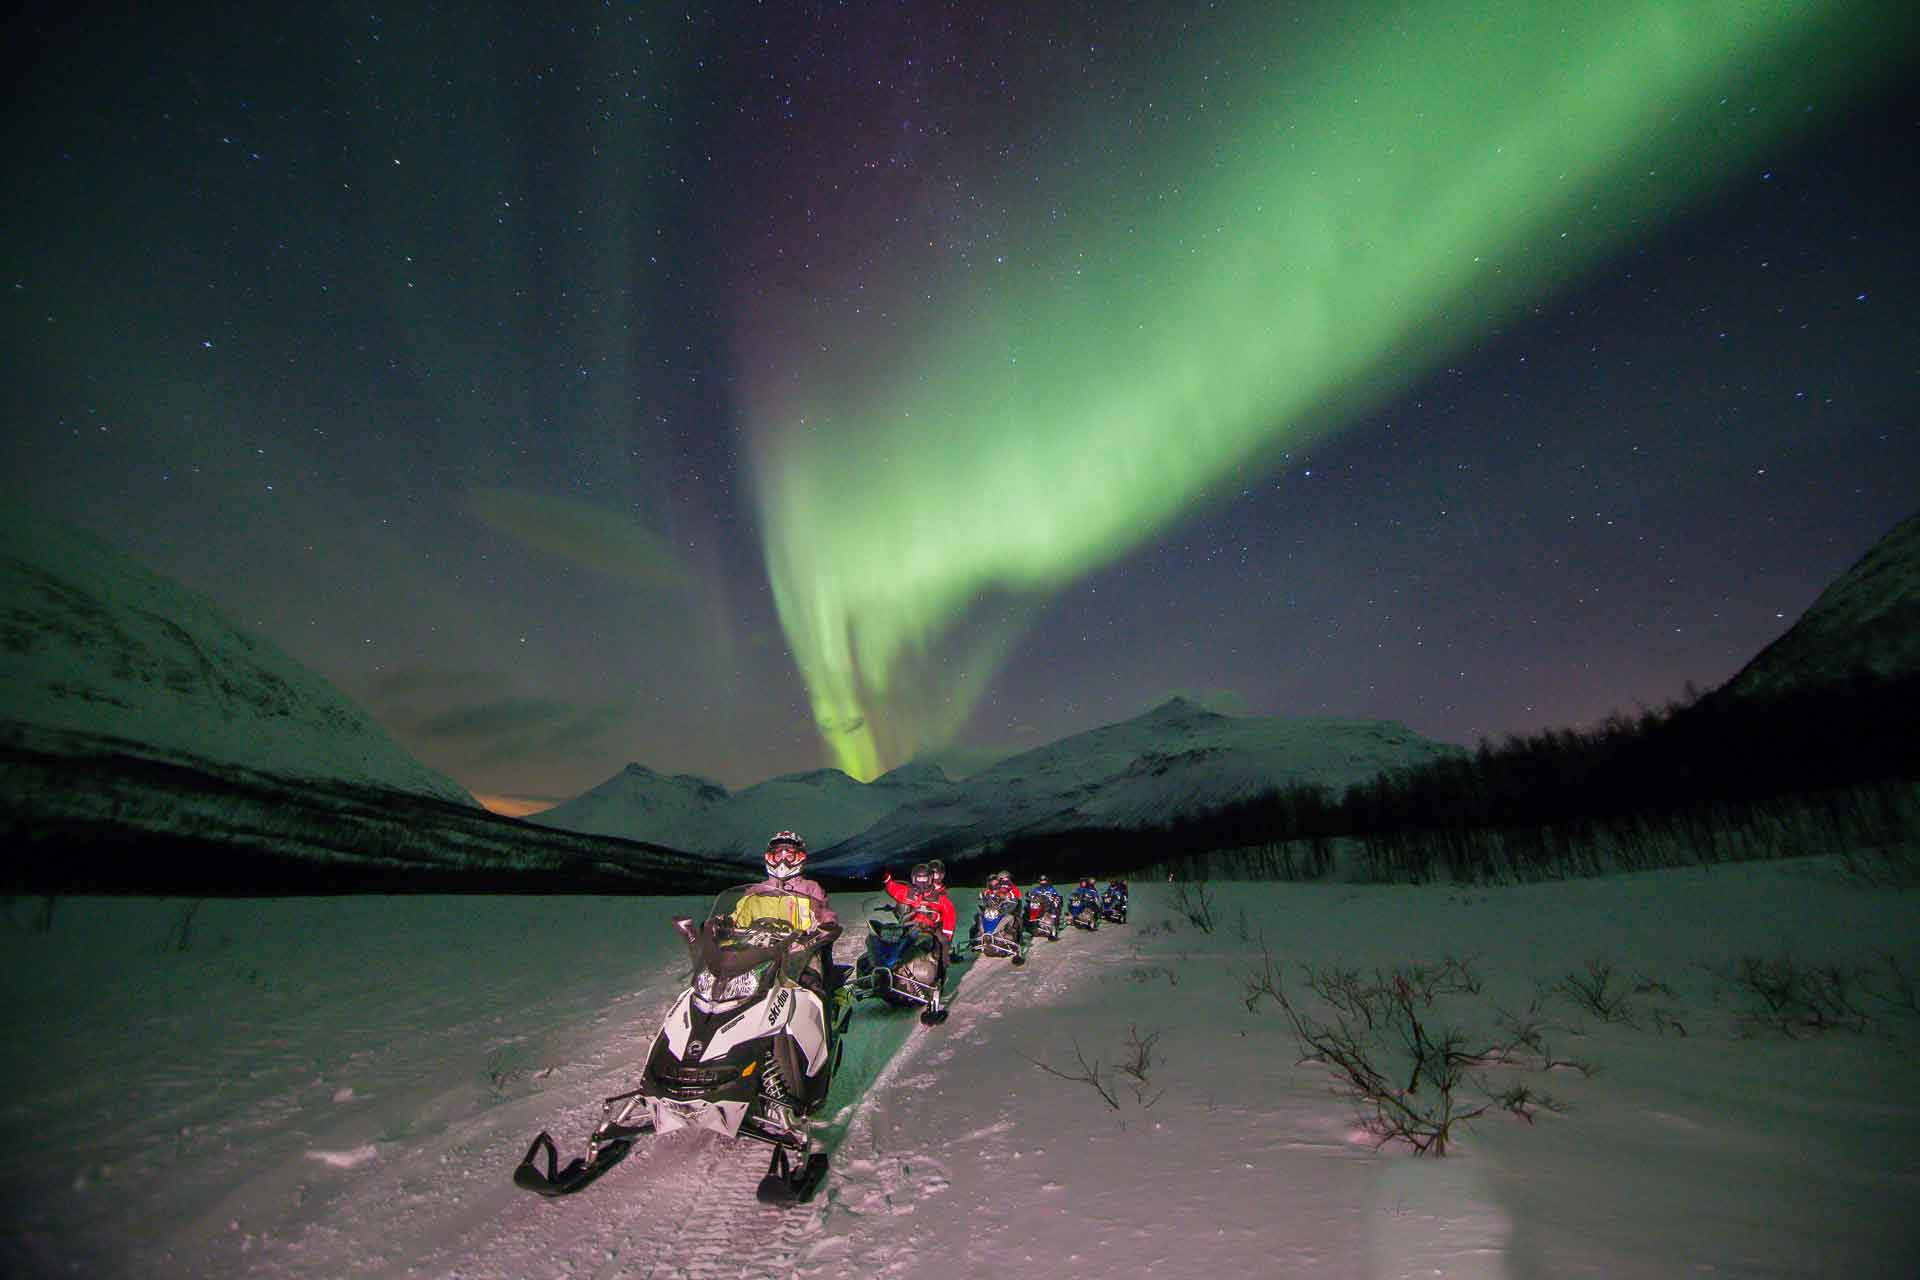 Photo. Group of people on Snowmobile safari under the northern lights